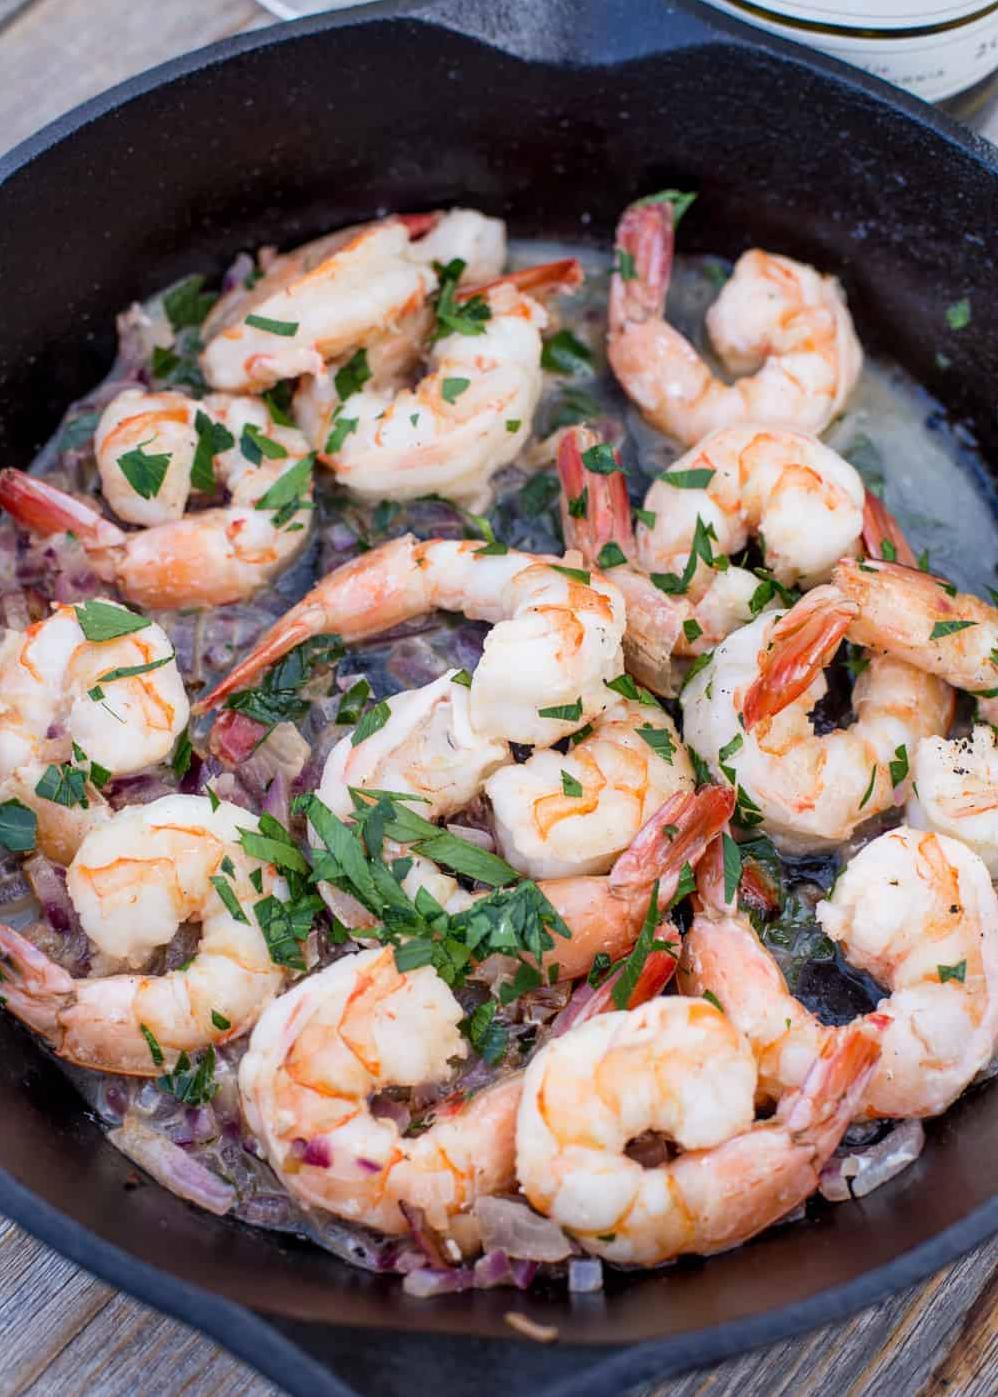  Wine not try this simple marinade for your next shrimp dish?